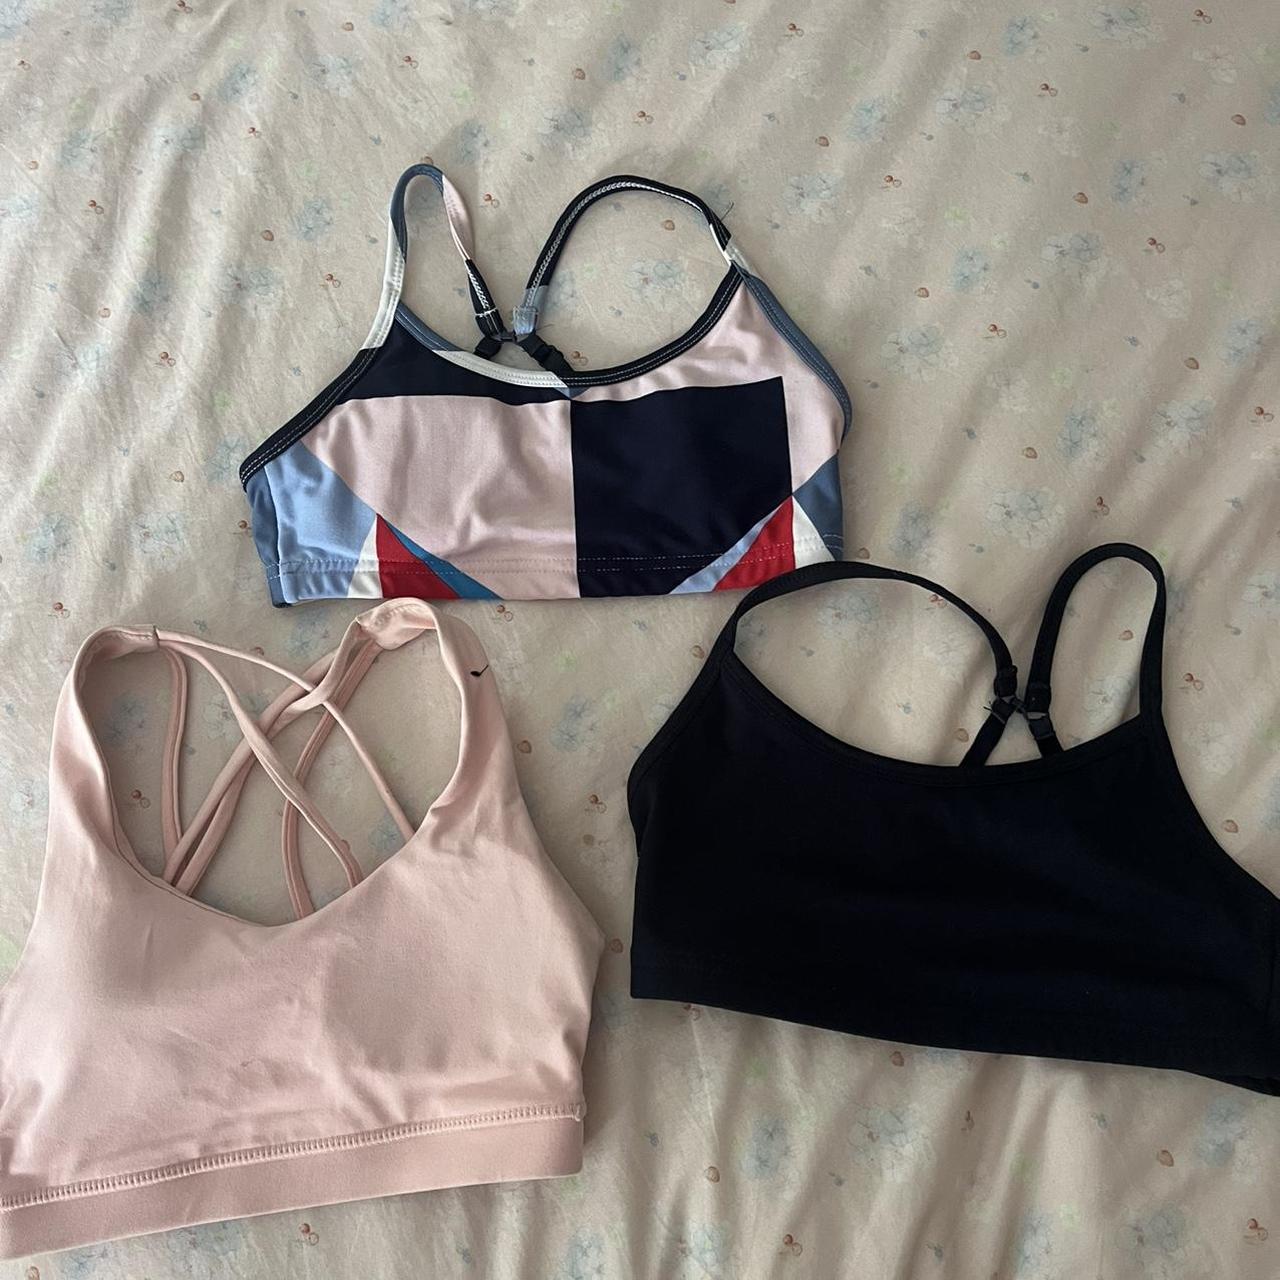 cotton on sports bras (can be sold together or - Depop